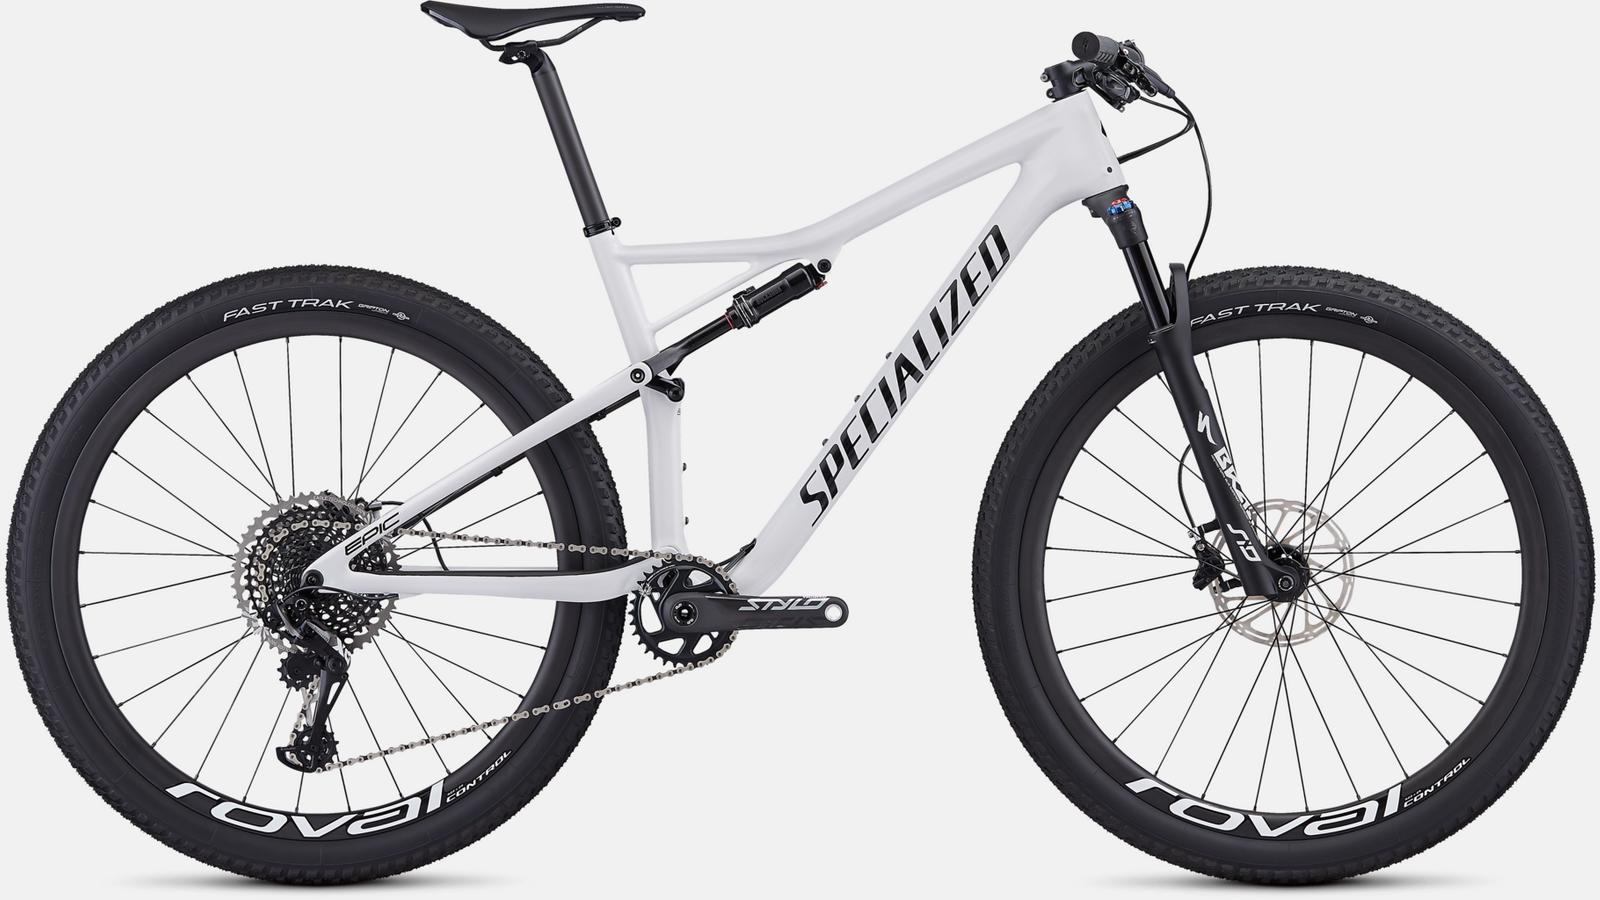 Touch-up paint for 2019 Specialized Men's Epic Pro - Gloss White